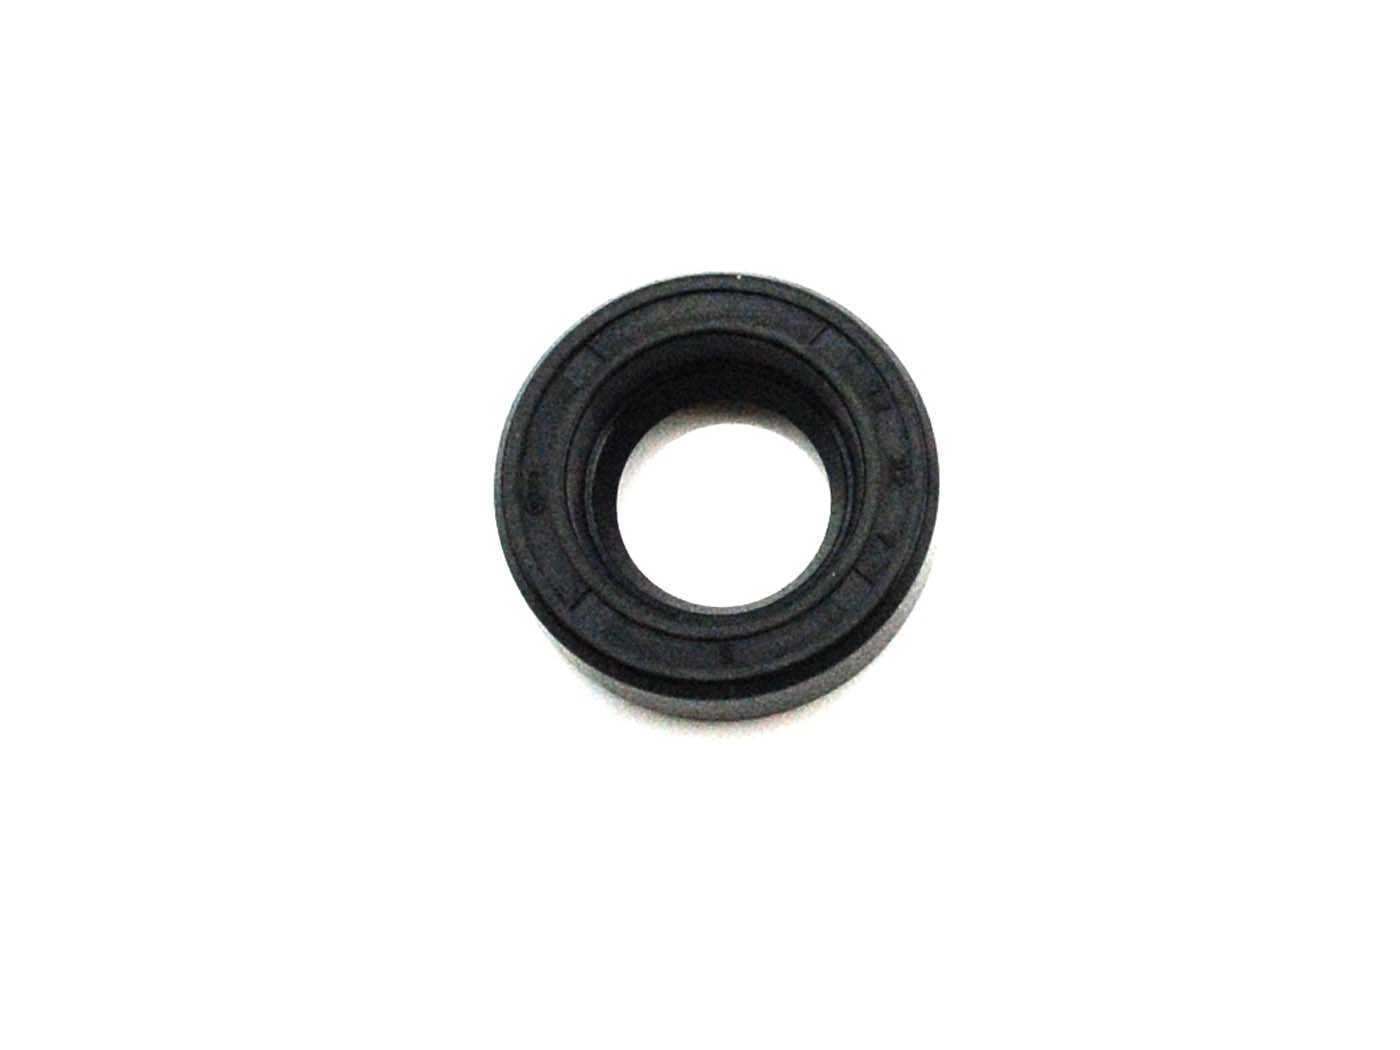 Simmering Clutch Drilastic Dimensions 12x22x7mm For Moped 712 F Luxus And Komfort 25, Super Moped 713 Super-Luxus 40, 725 Mini-Bike, 726 Mokick 730, 731 Sport, 732 Sport